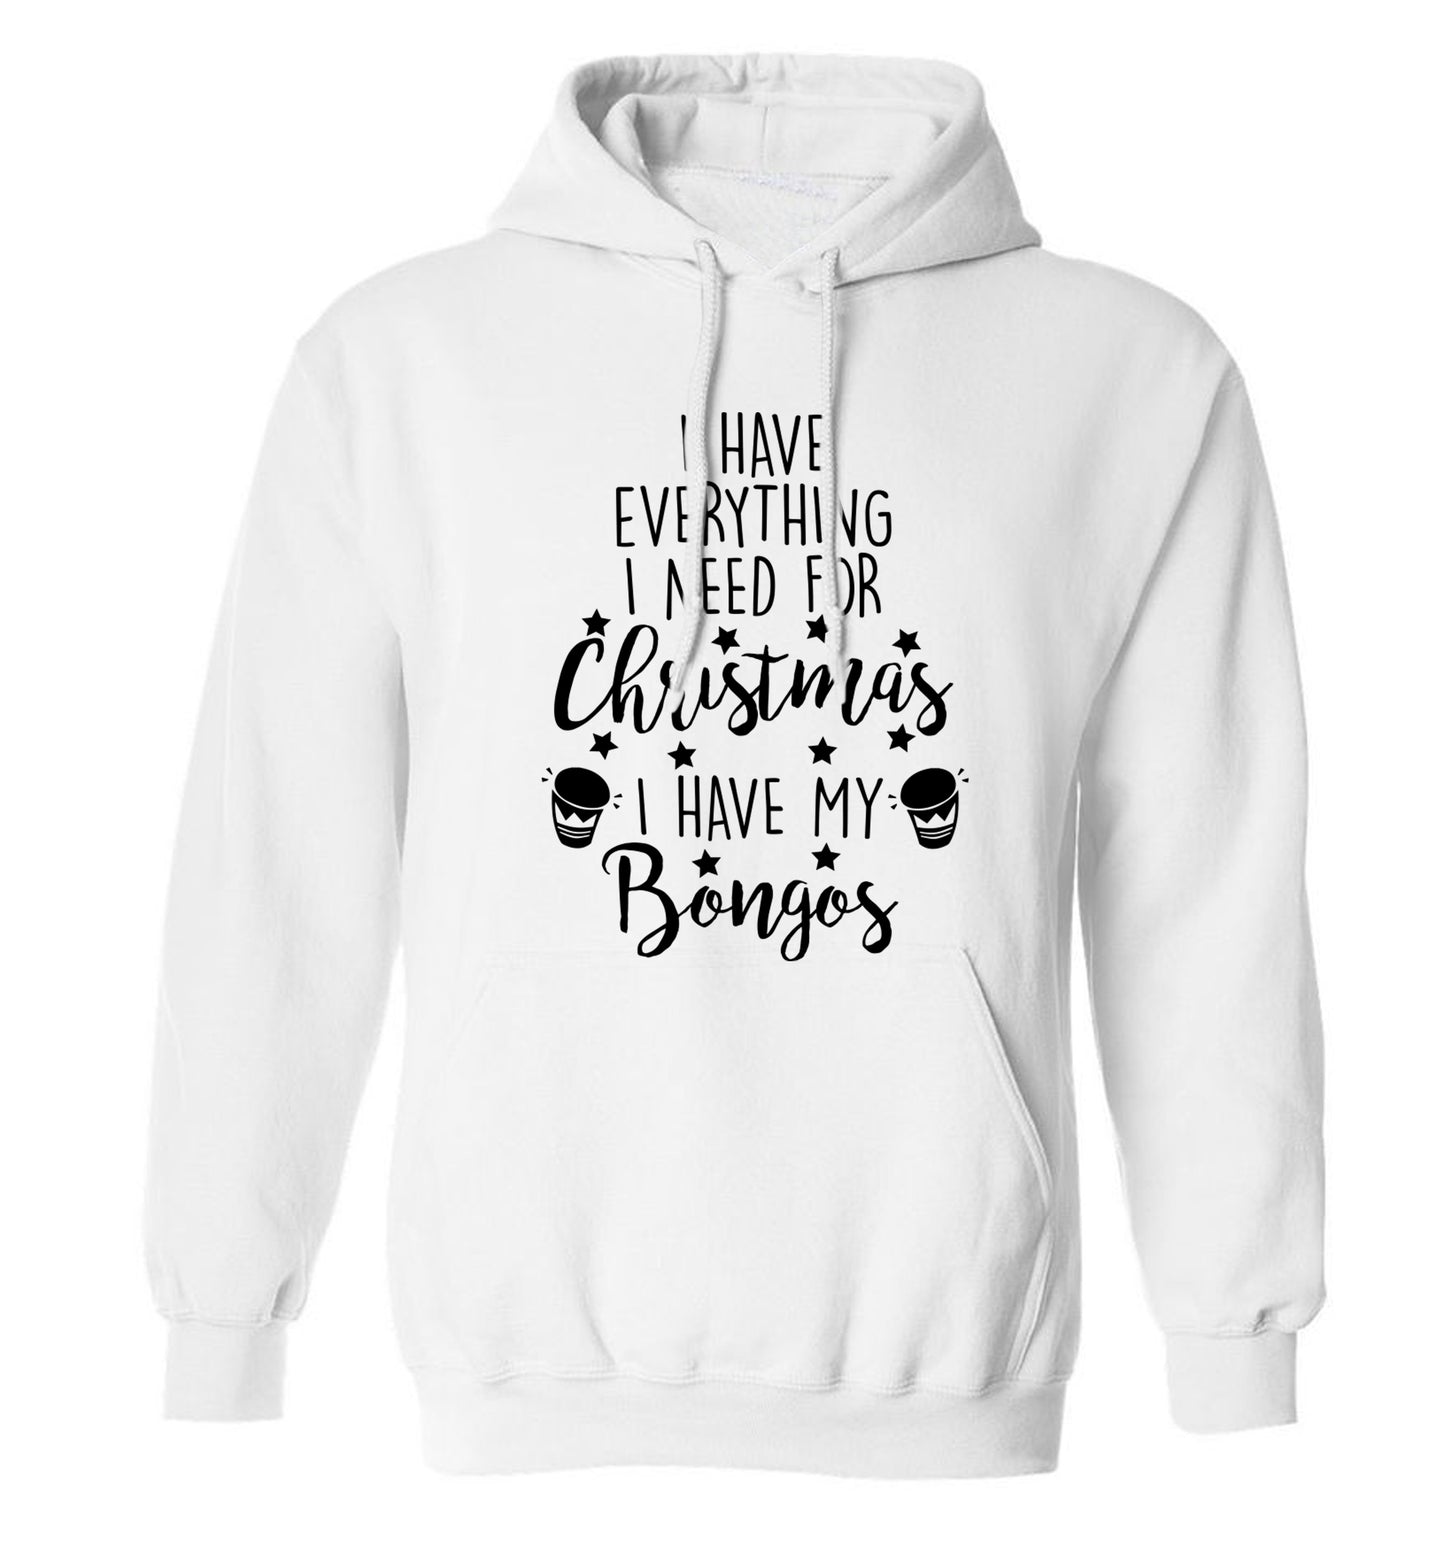 I have everything I need for Christmas I have my bongos! adults unisex white hoodie 2XL